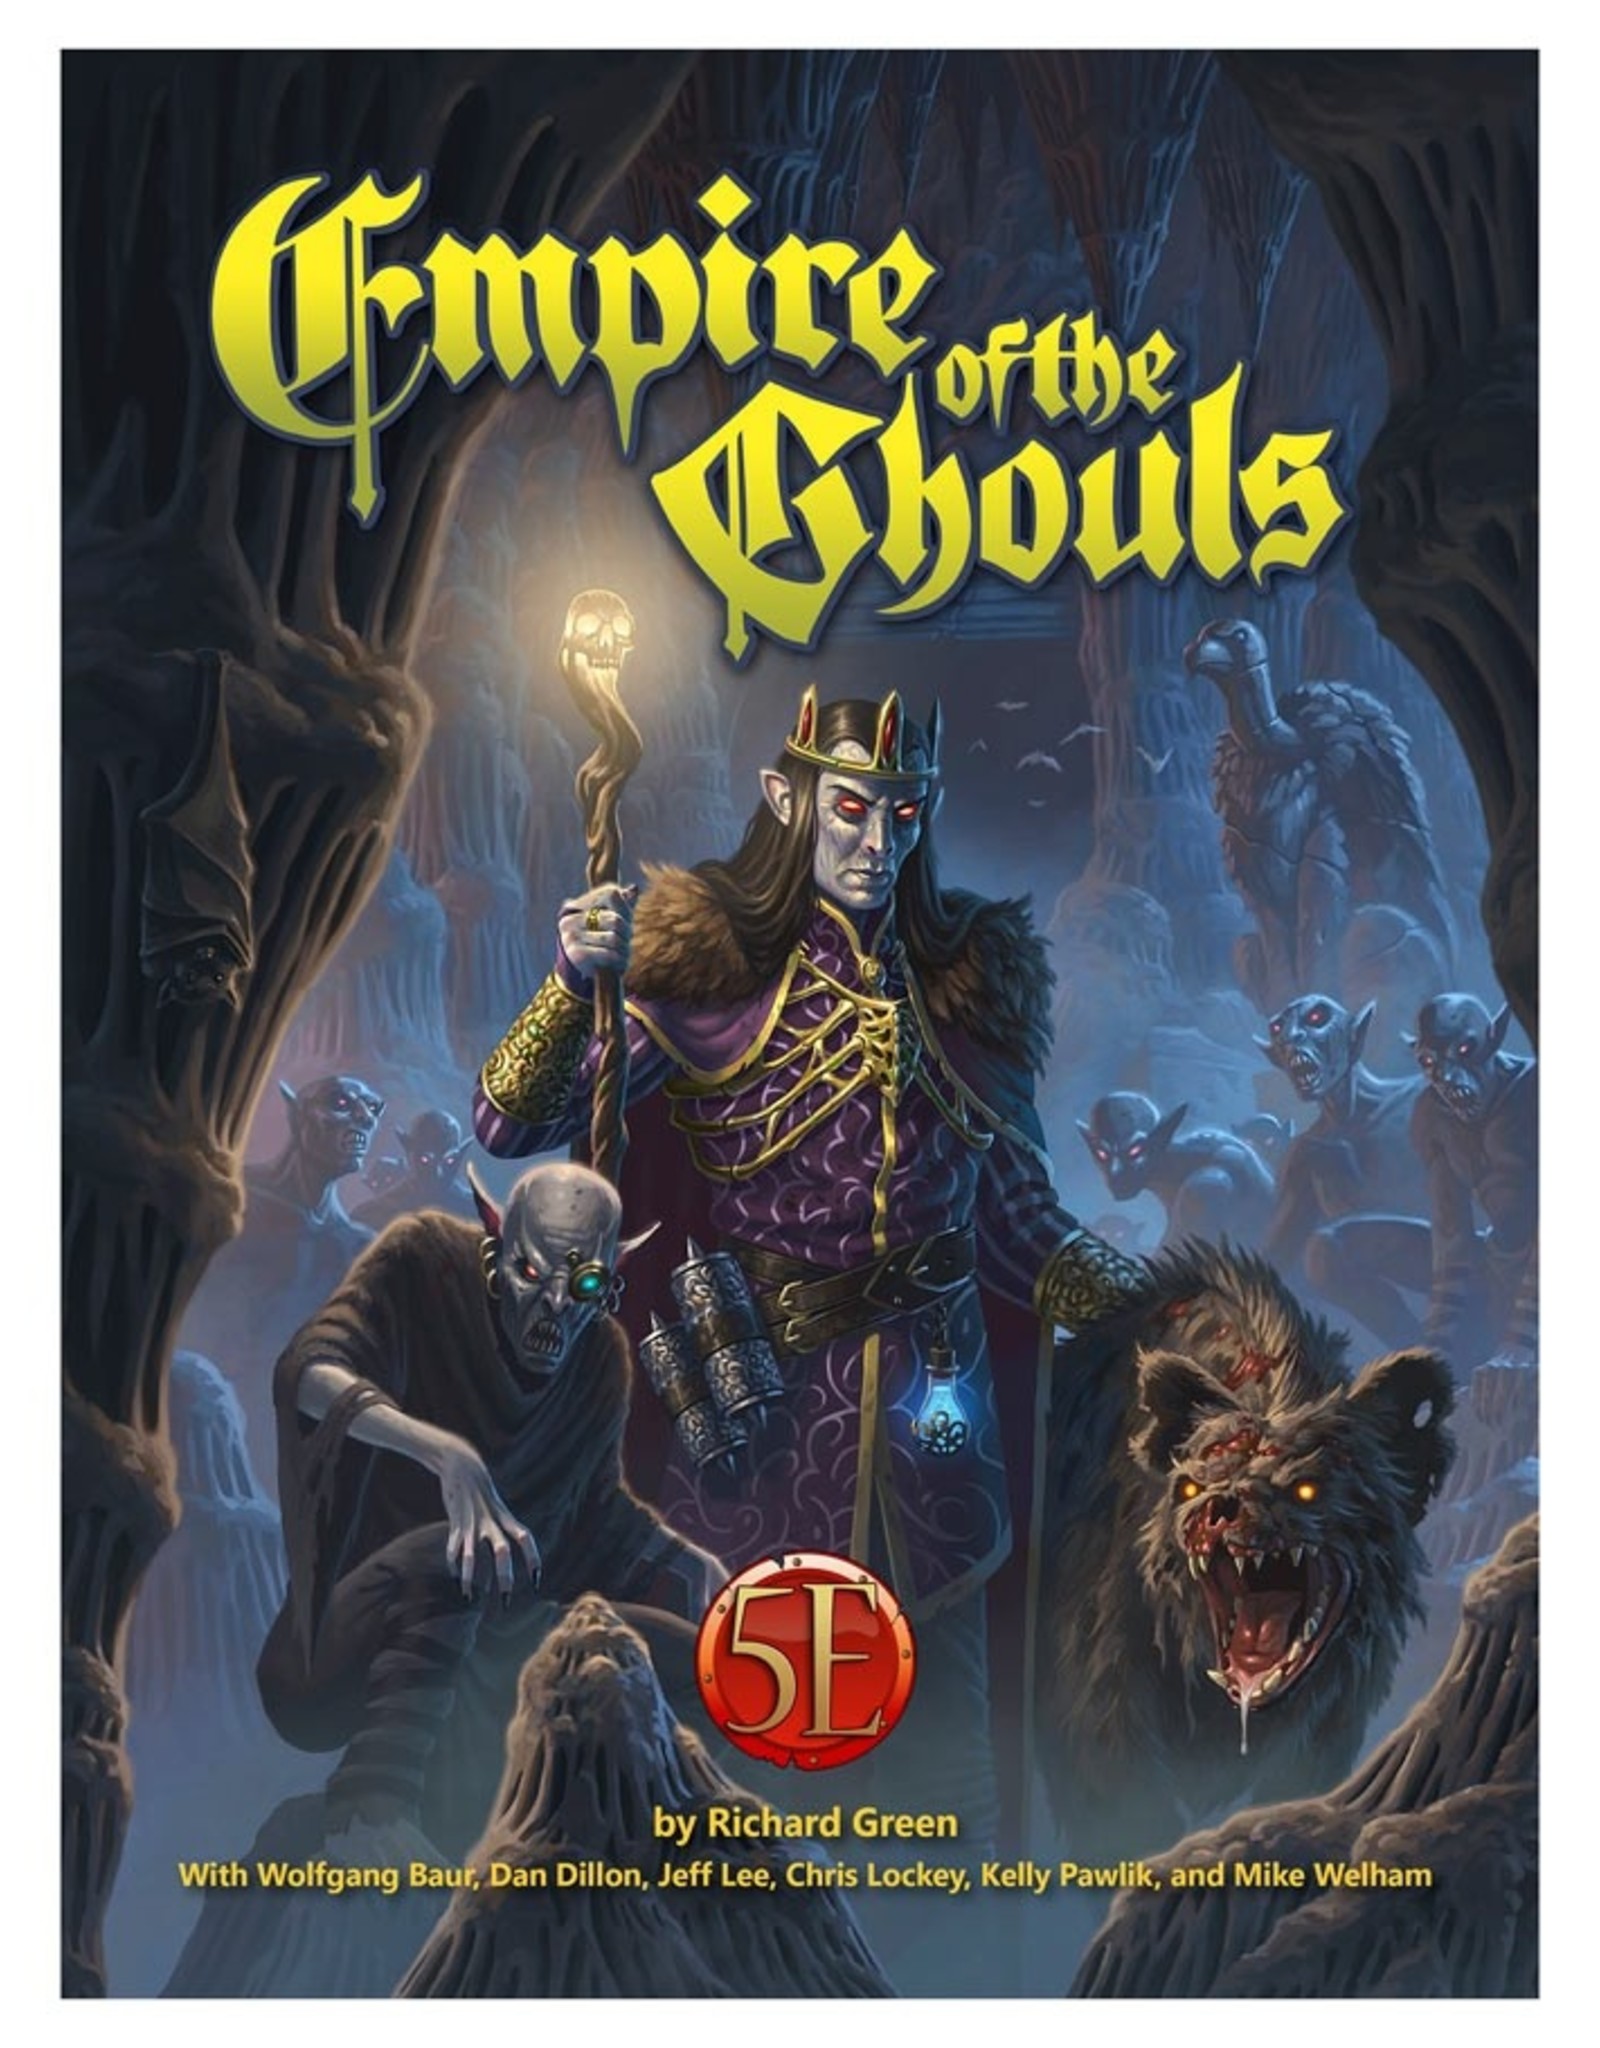 Kobold Press 5E: Empire of the Ghouls (Hardcover)